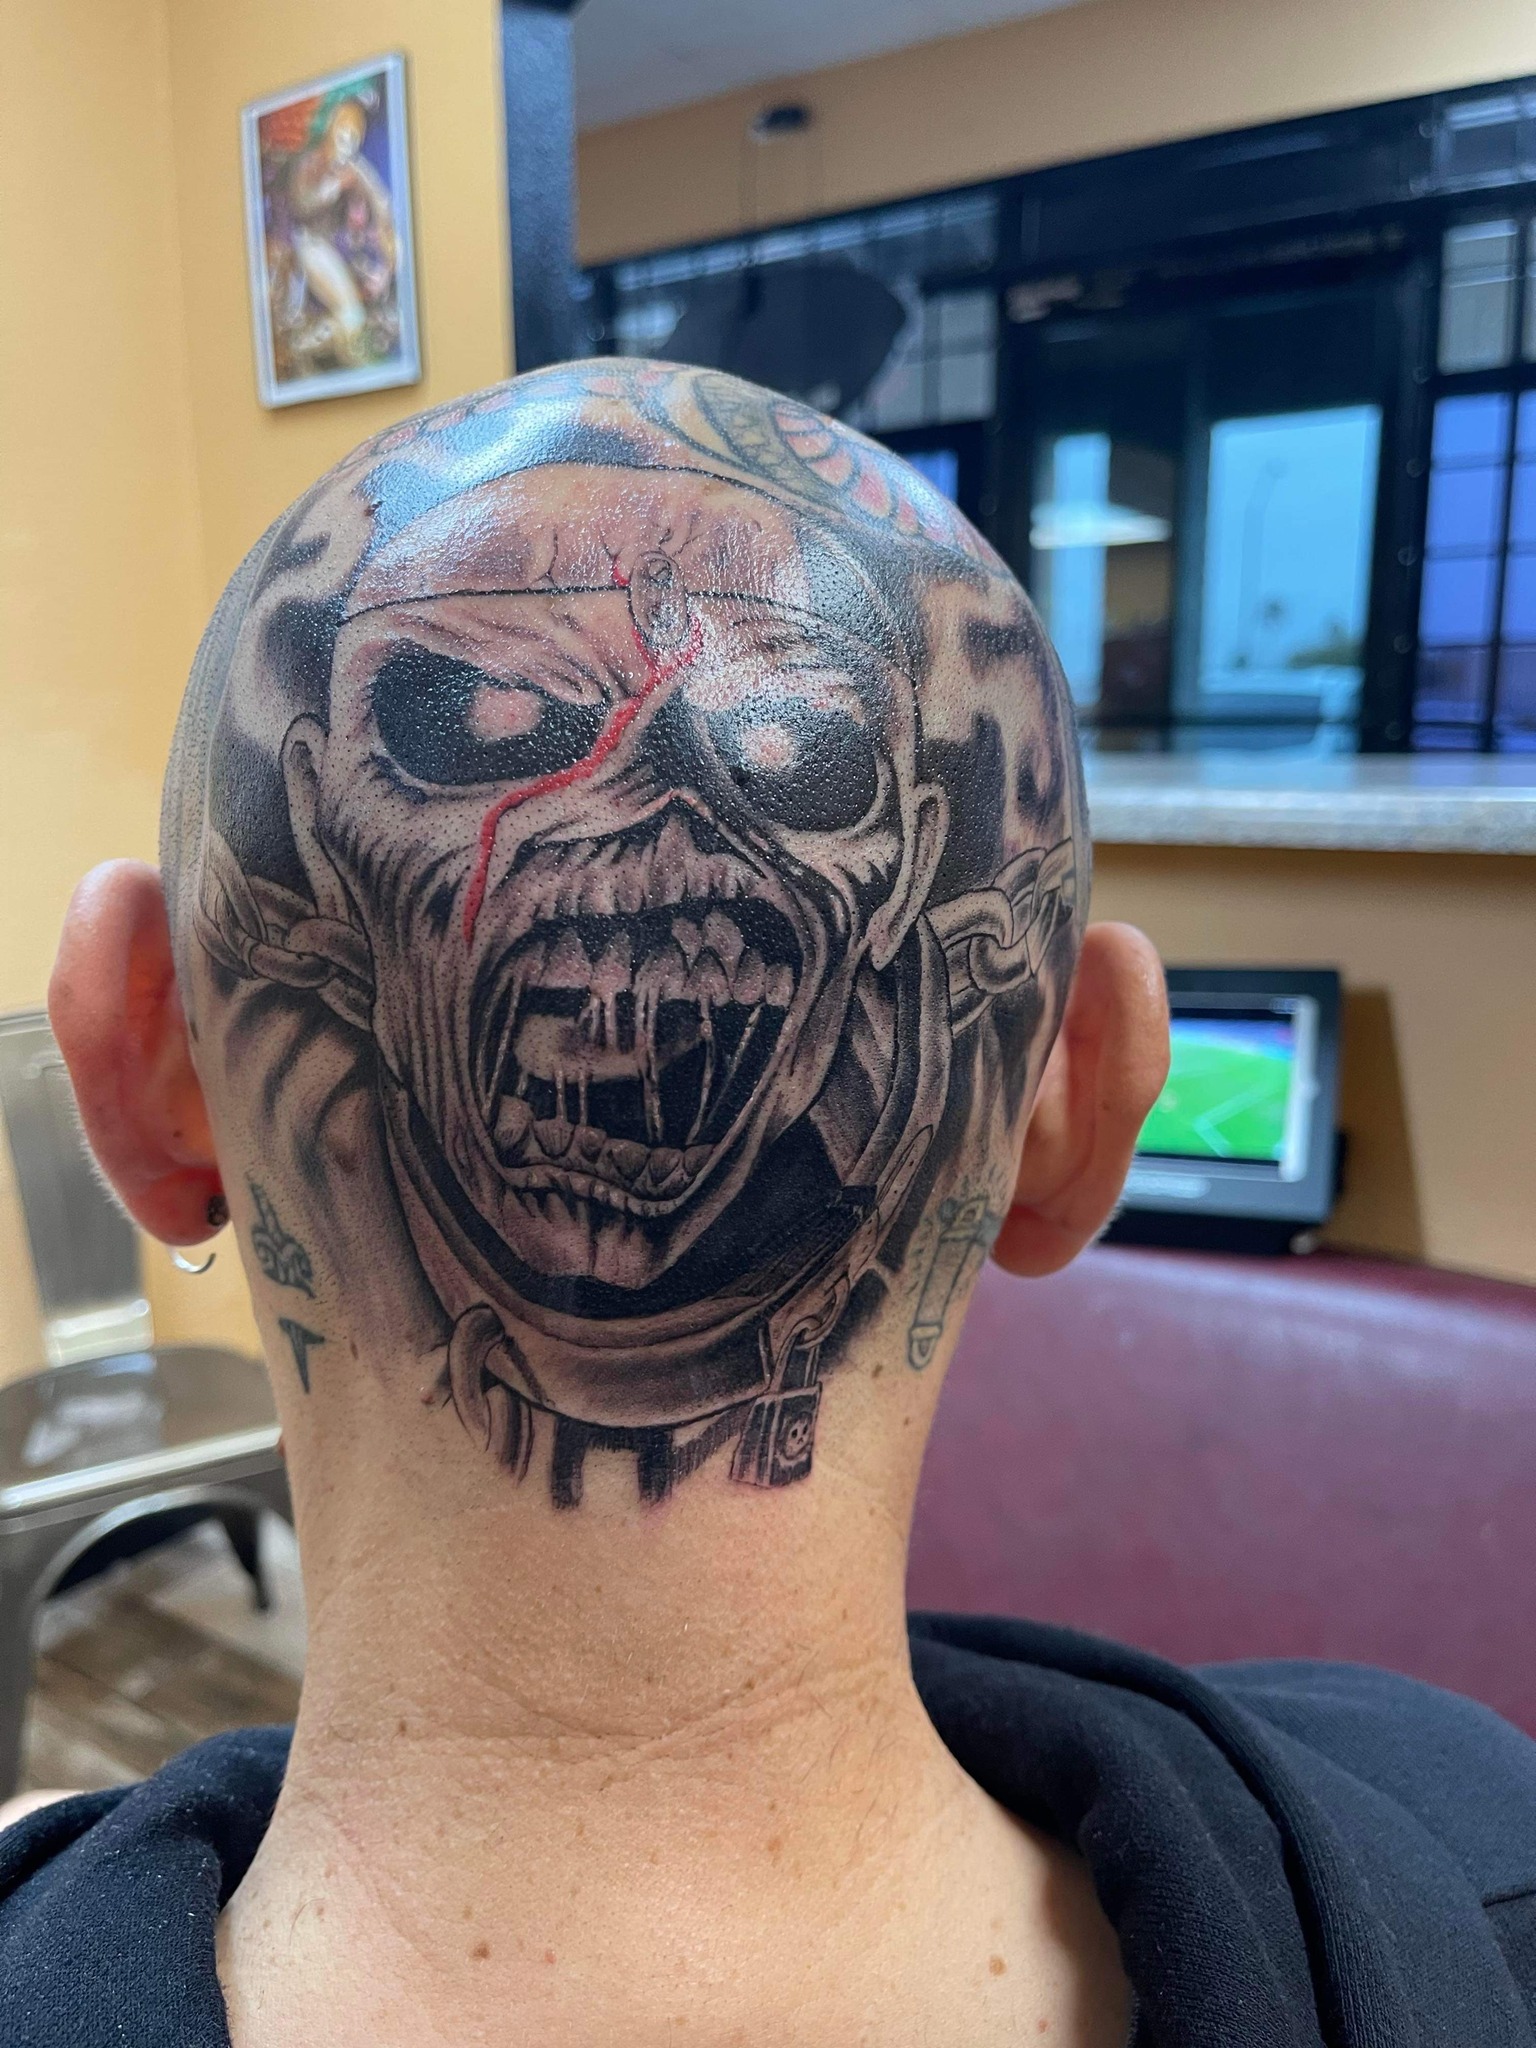 Stacey Anderson  Tattoo Artist  Cheeky knee piece done on this iron maiden  leg sleeve done the other dayyy  tattoo tattoos ironmaiden colour  music  Facebook